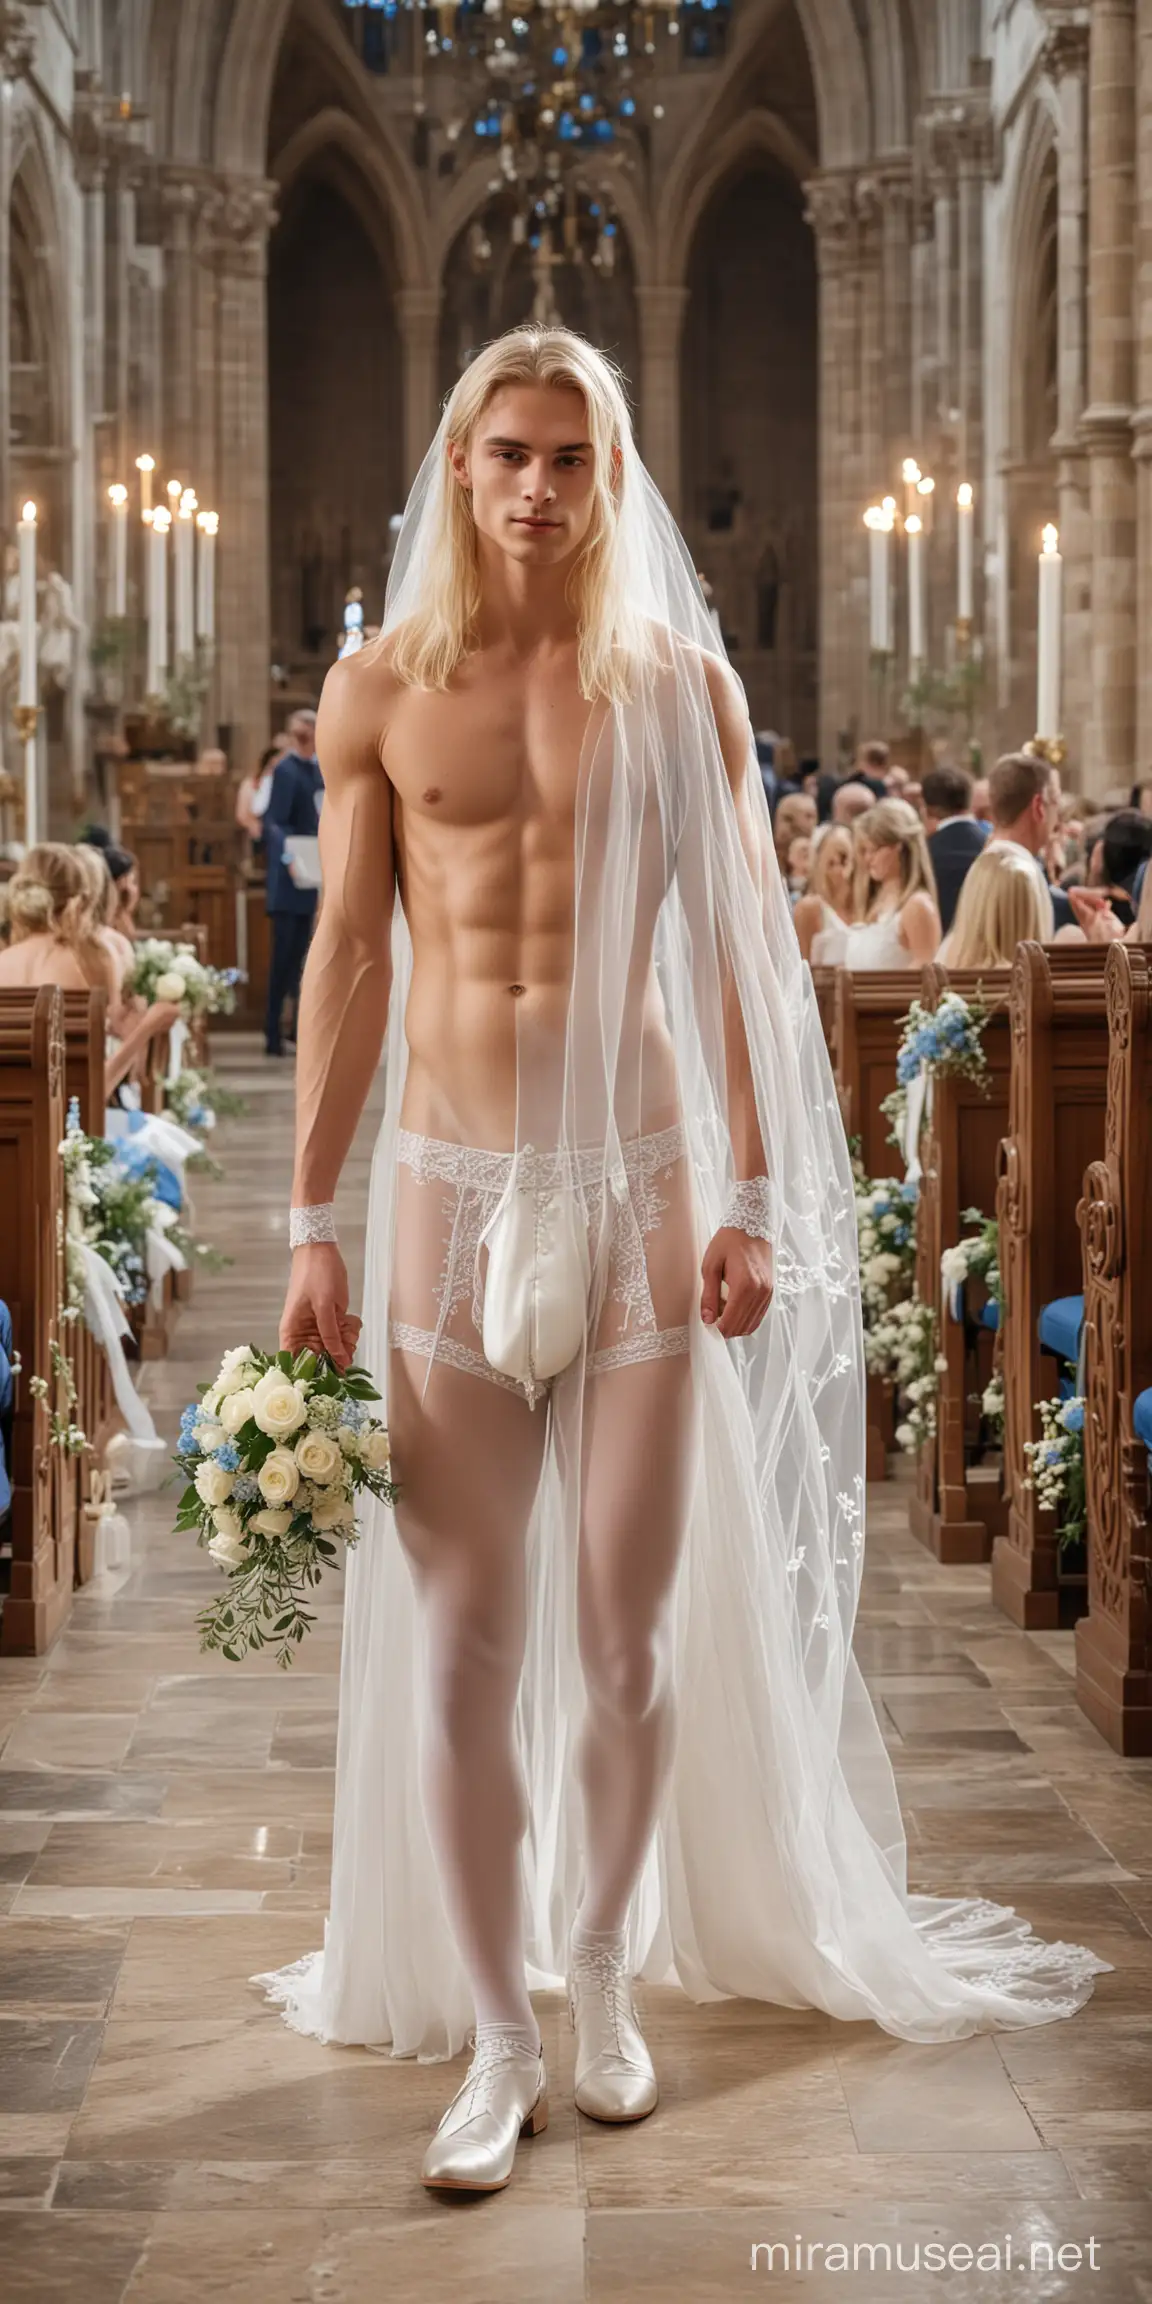 Handsome Young hot twink man as bride with beautiful, smooth slender body, long blonde hair, shirtless , oiled up, body glistening wearing lace white panties, has a white veil, white high heels, lace white stocking, blue garter, light gold jewelry, holding bouquet of white flowers, walking down the aisle ,background of old traditional cathedral